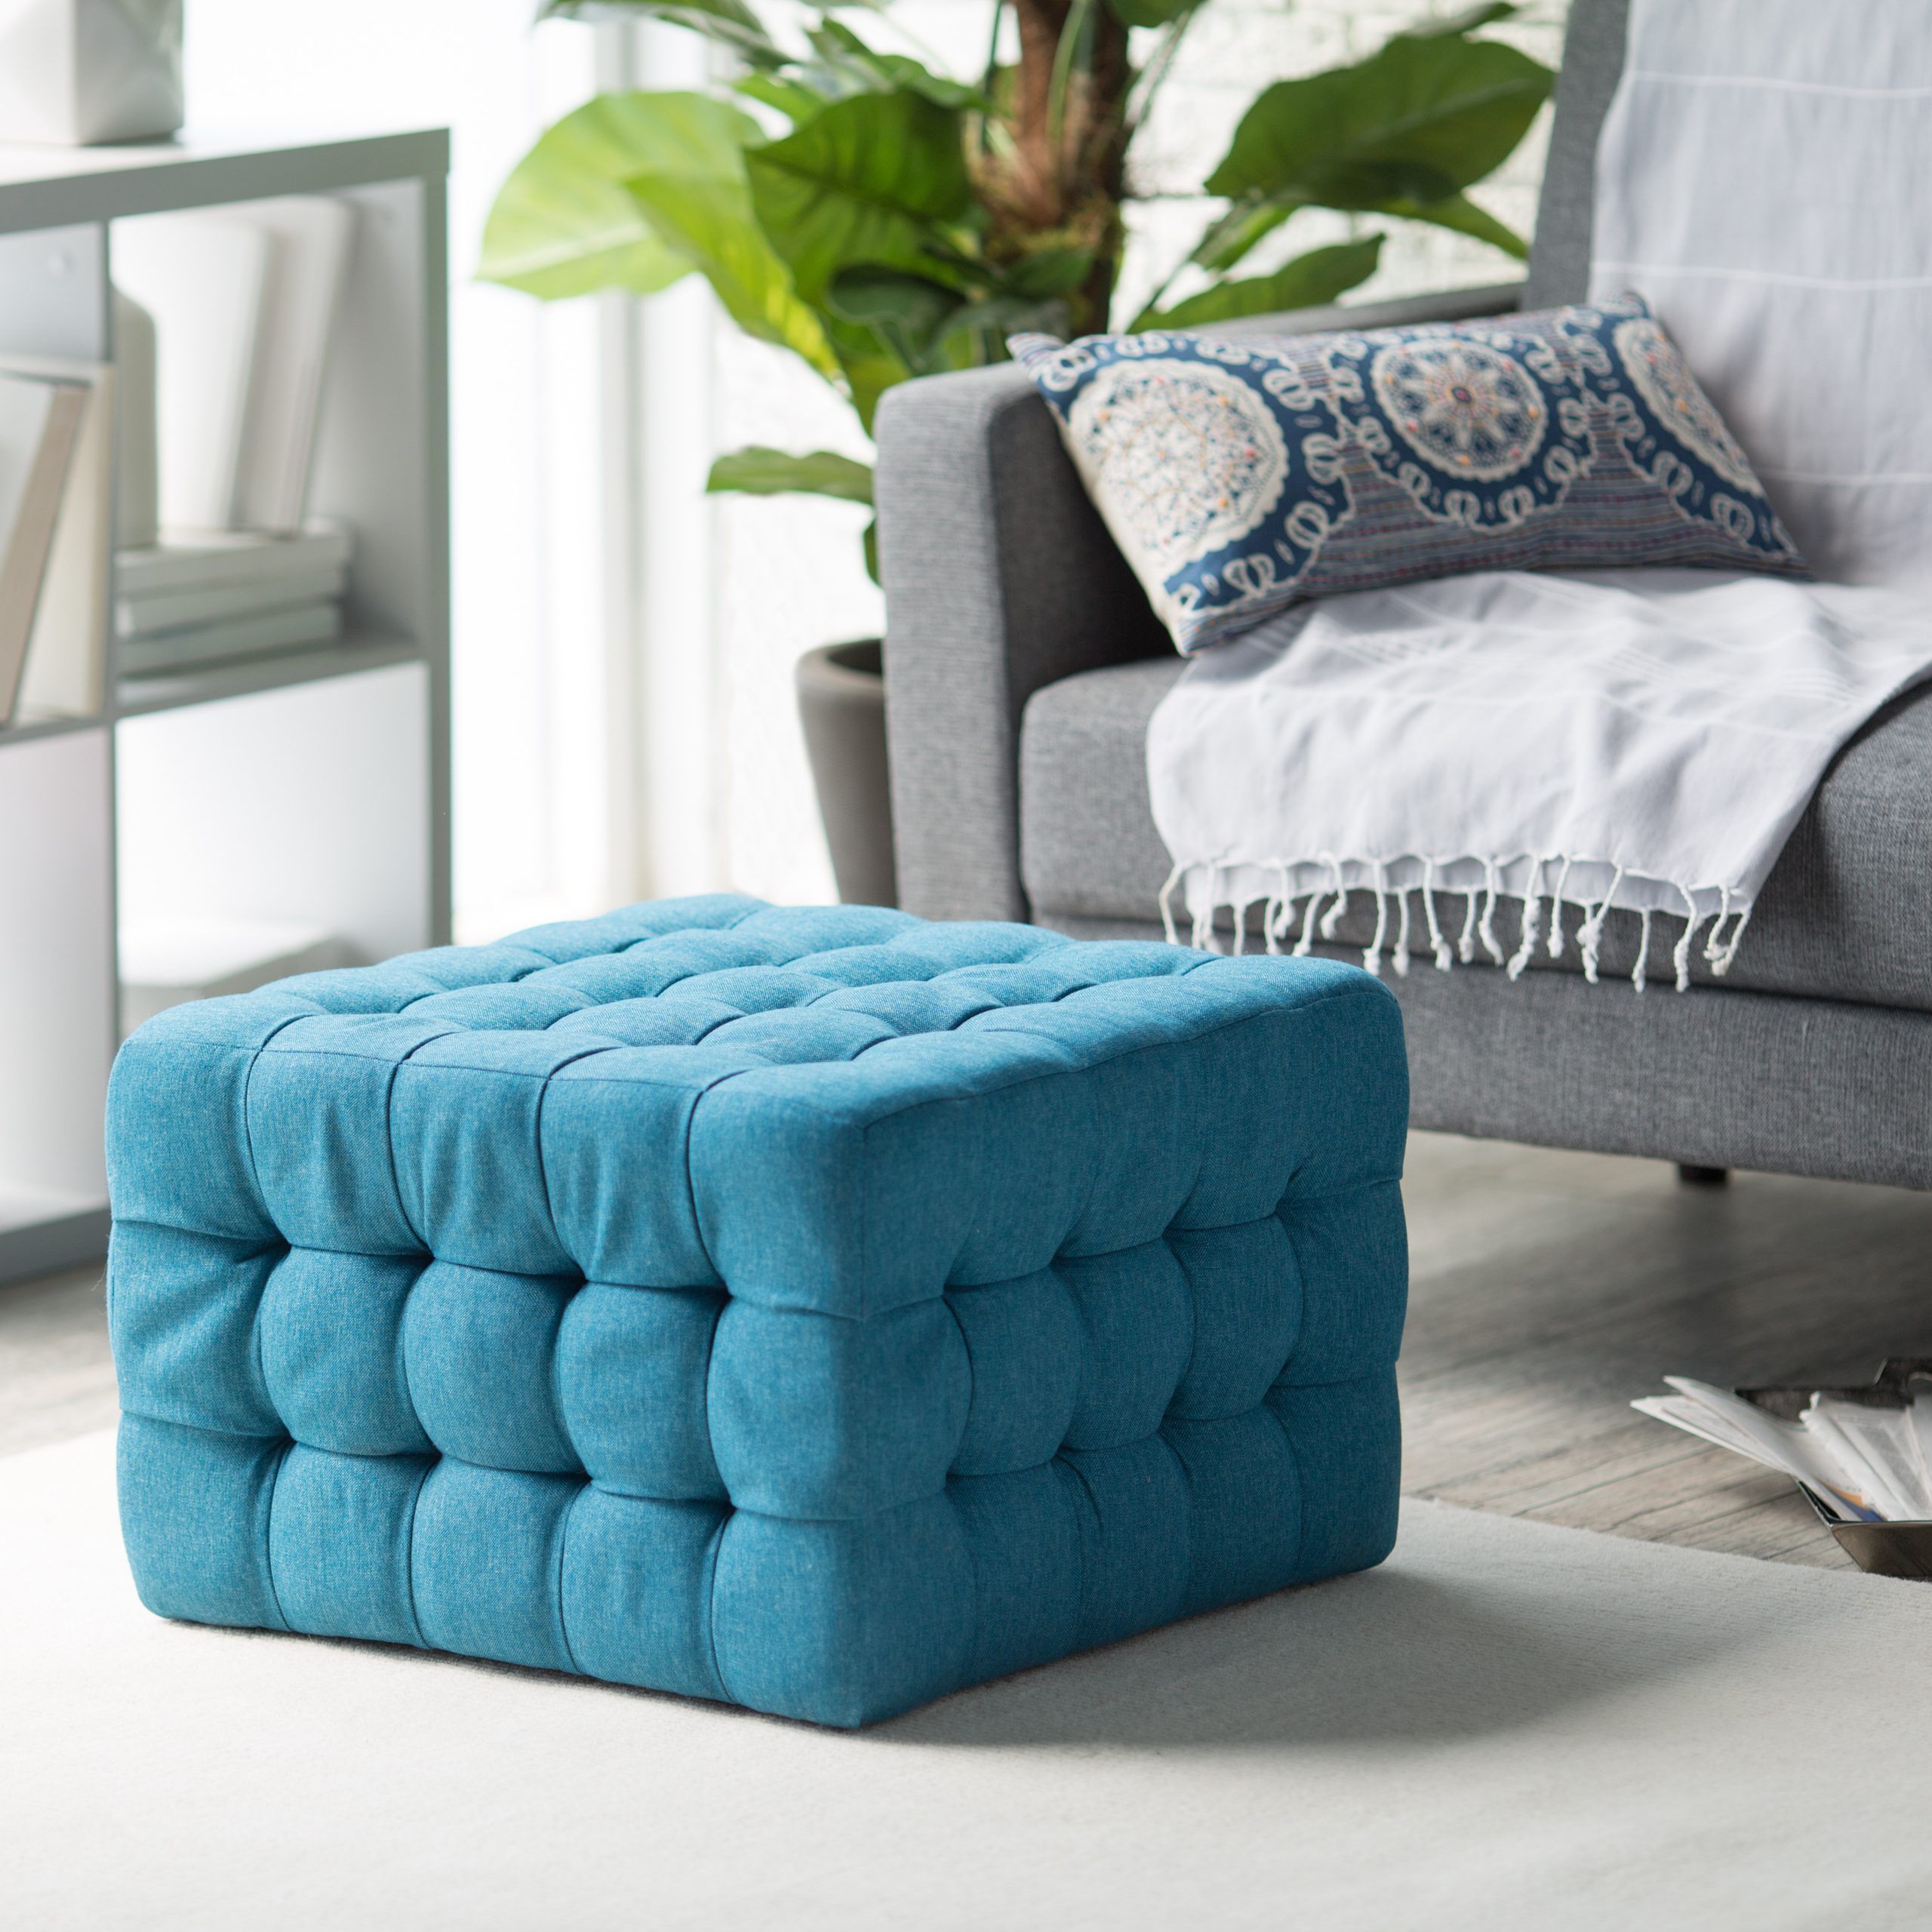 Well Known Green Fabric Square Storage Ottomans With Pillows Within Belham Living Allover Tufted Square Ottoman – Teal – Ottomans At Hayneedle (View 5 of 10)